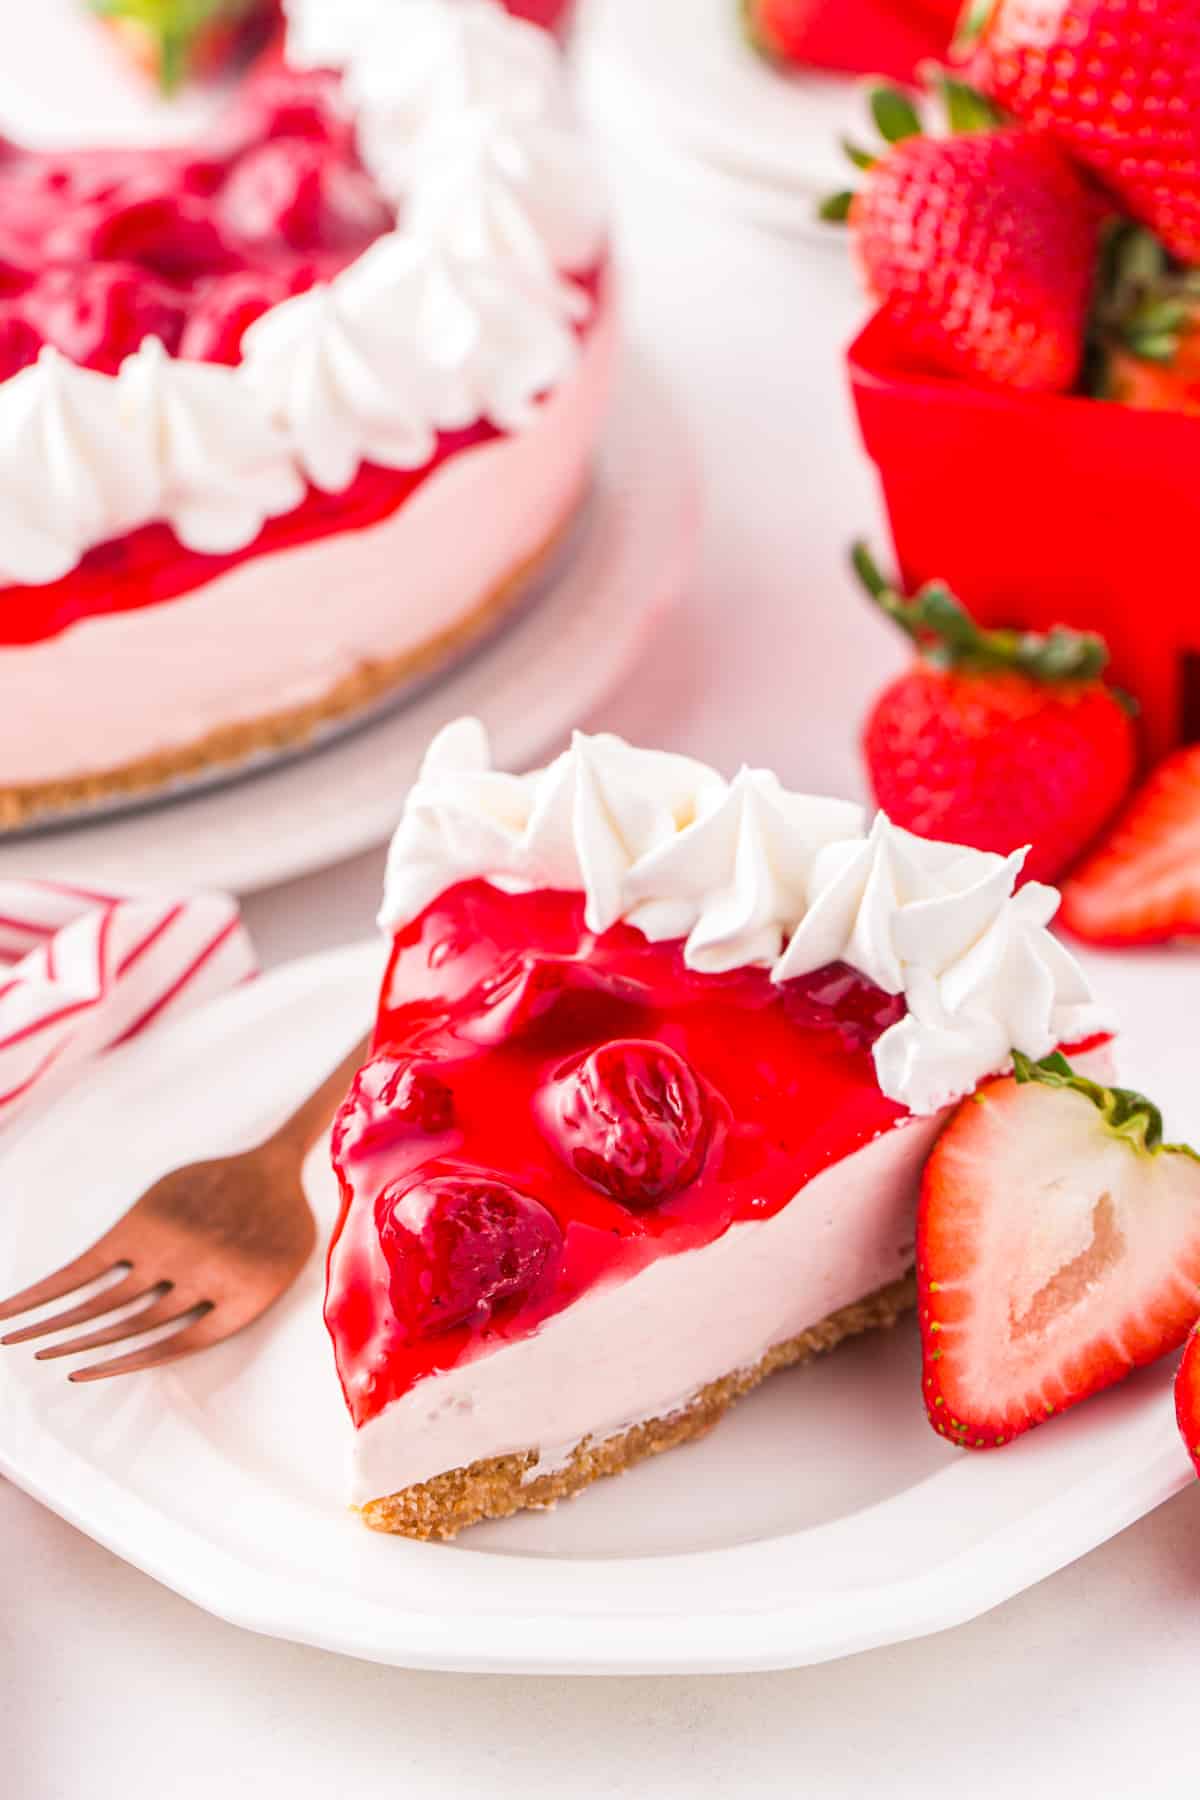 Slice of no bake strawberry cheesecake with strawberry topping and whipped cream piping on edge. Remaining cake and fresh strawberries are in background.